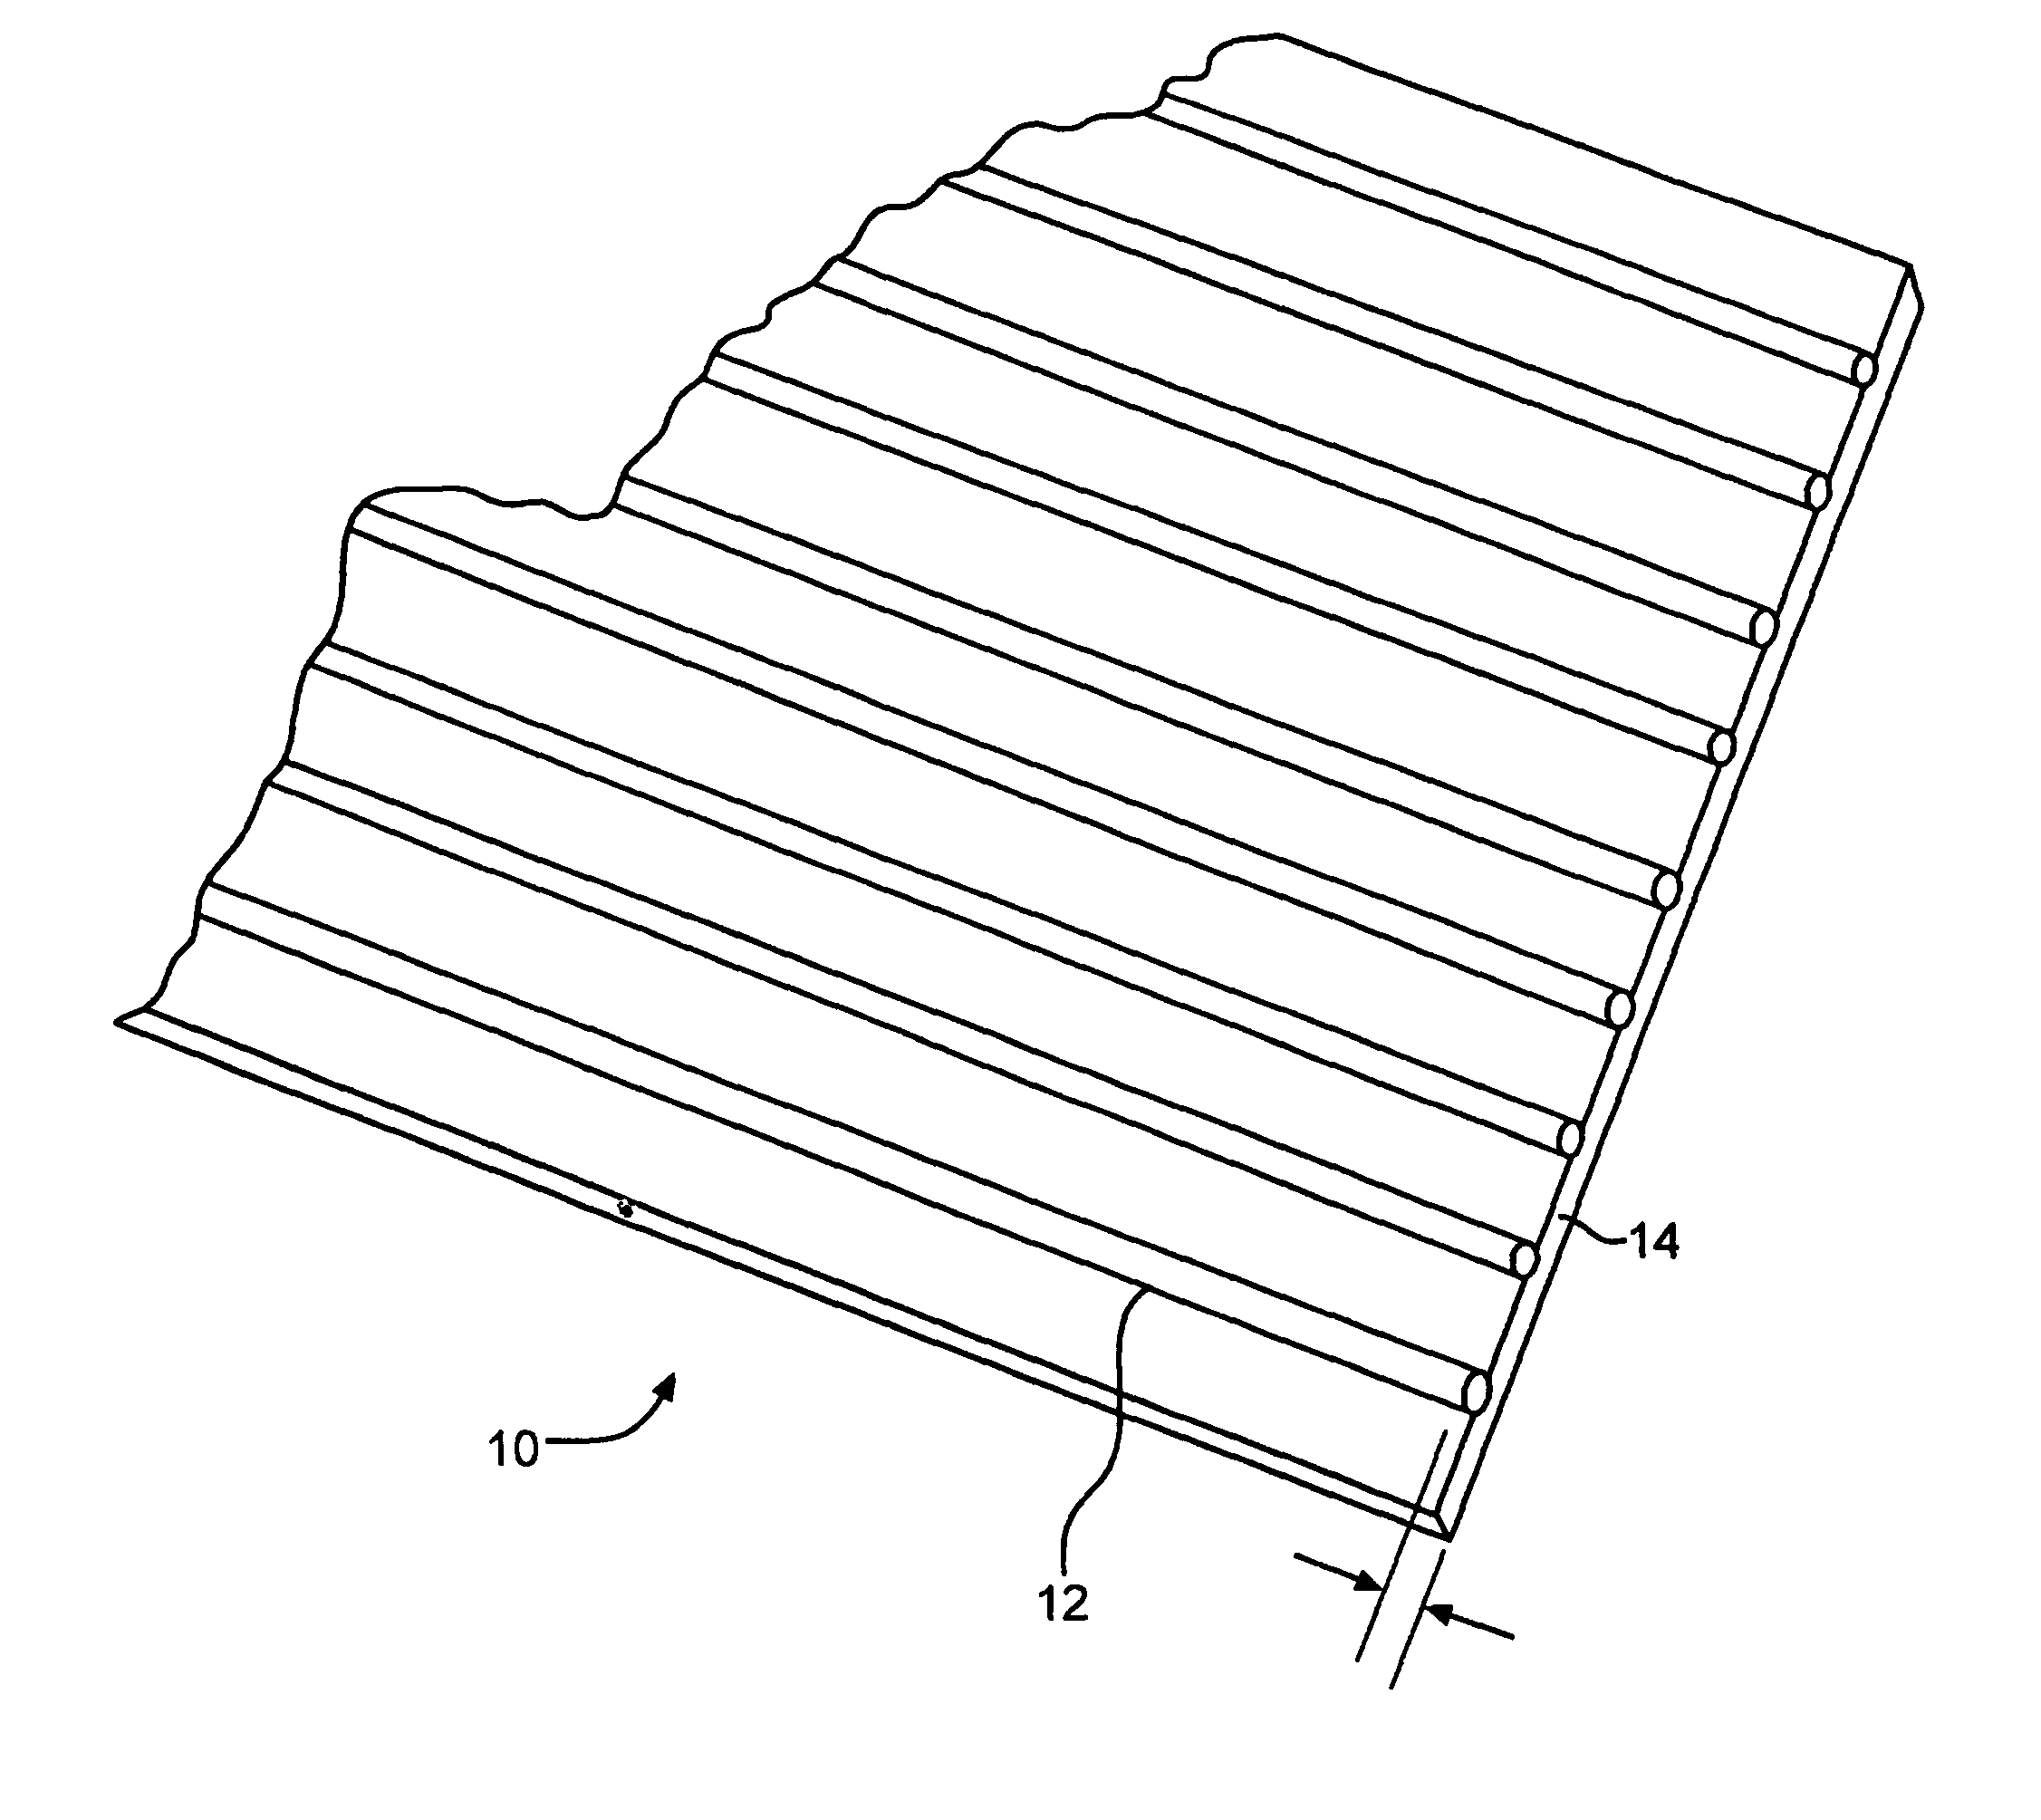 Lead acid battery with gelled electrolyte formed by filtration action of absorbent separators and method for producing it